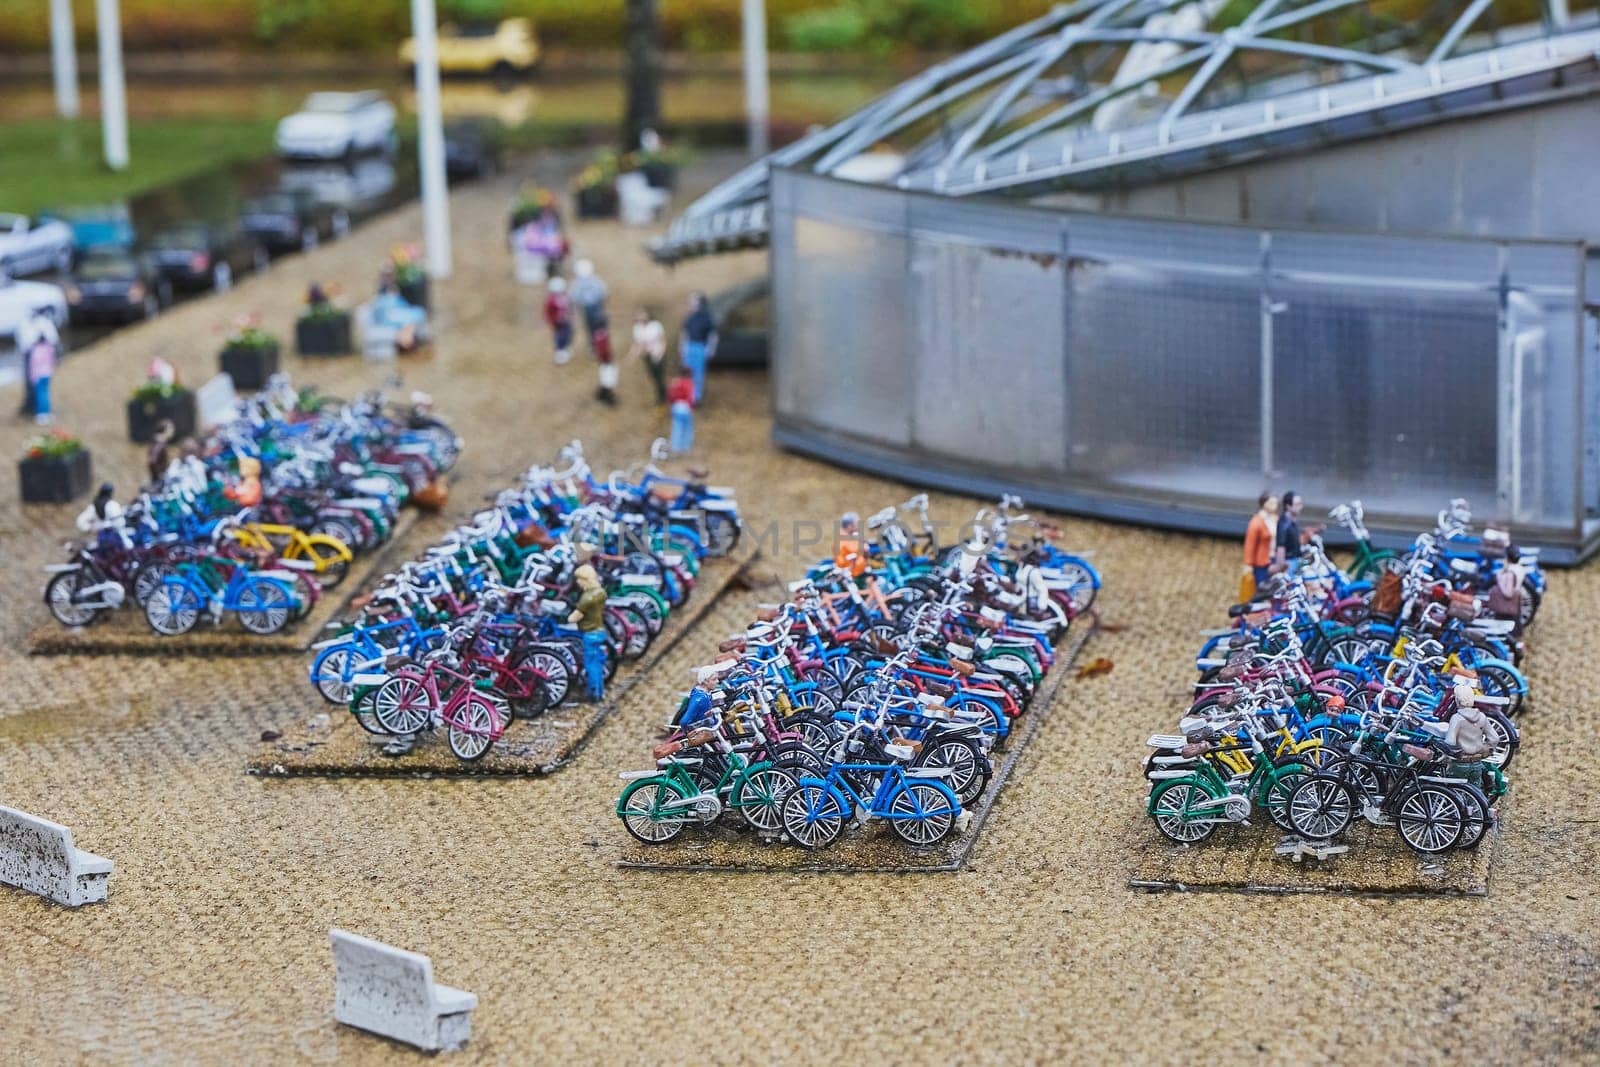 Miniature public bicycle parking in an amusement park in Netherlands by Viktor_Osypenko